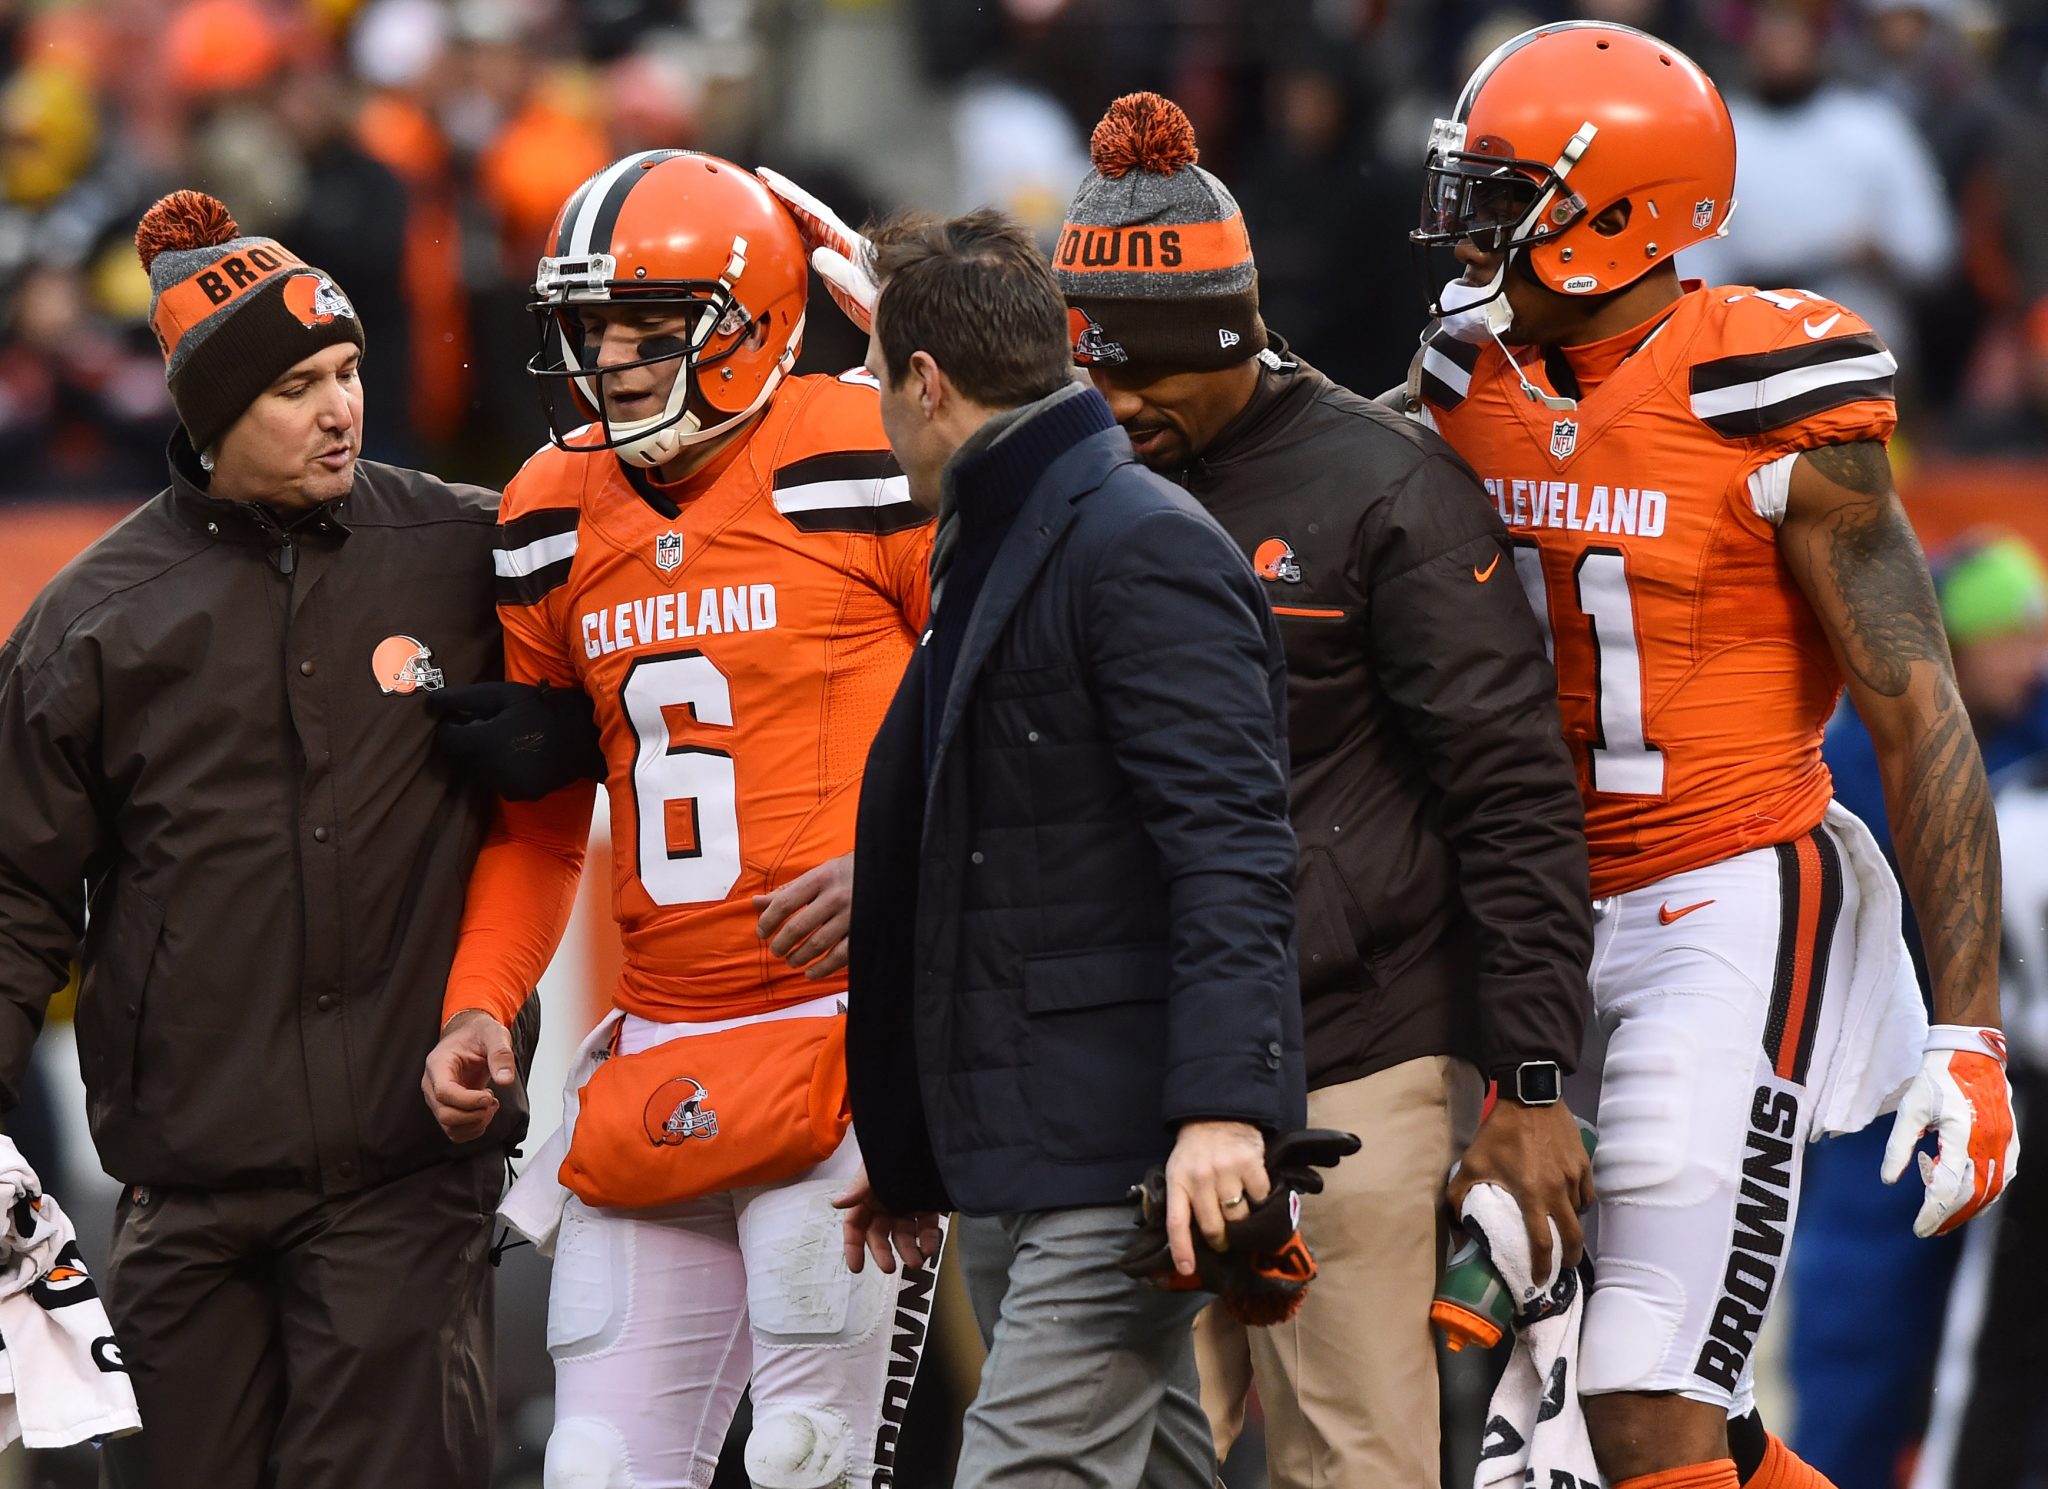 New York Giants: Browns QB Cody Kessler officially ruled out for Sunday's game 1